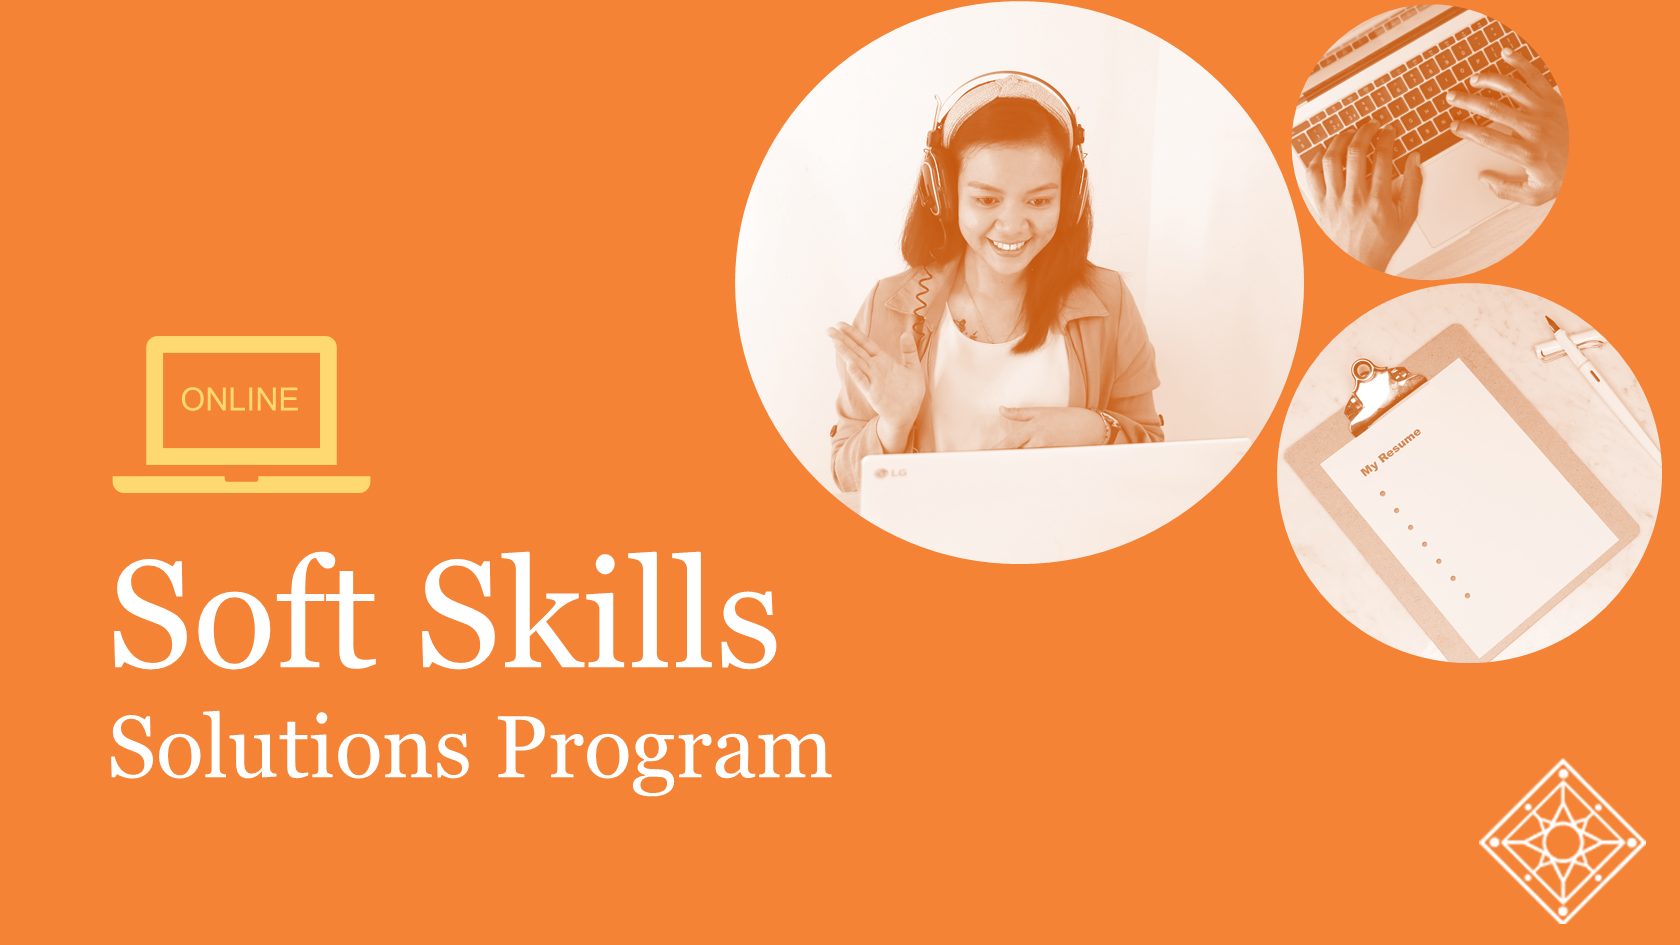 Title card that reads "Soft Skills Solutions Program" with an icon of a laptop that reads "Online". A collage of images depicting a clipboard, hands on a keyboard, and a smiling young woman with long brown hair as she waves hello on a video call.